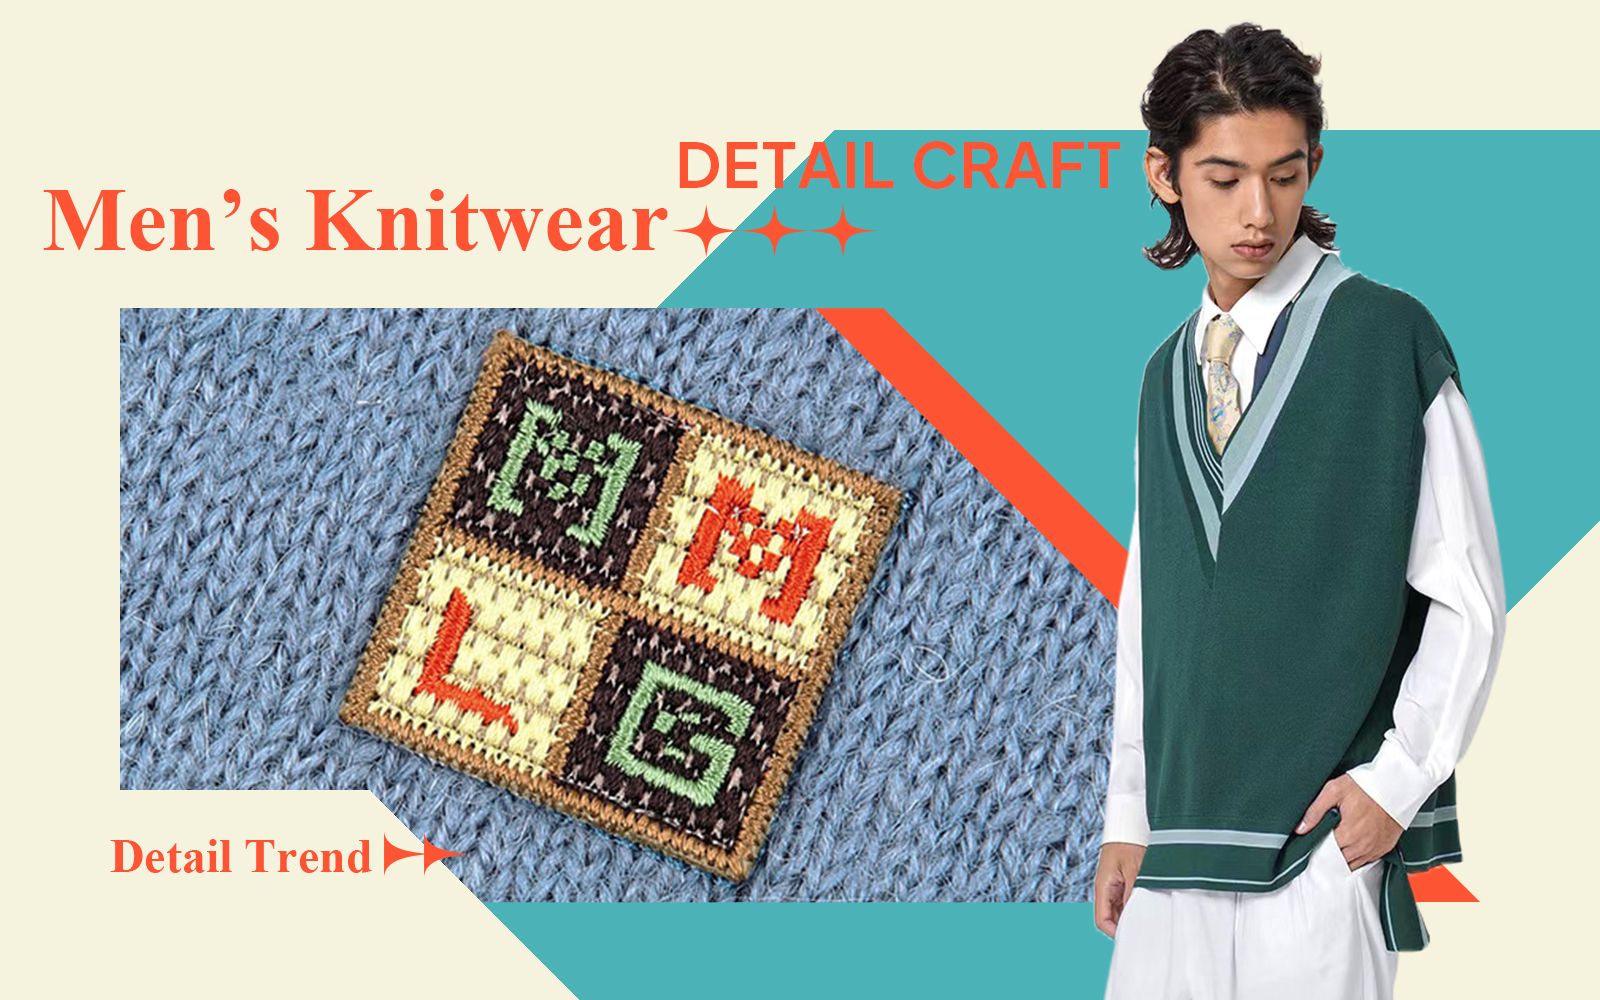 Embellishment -- The Detail & Craft Trend for Men's Knitwear